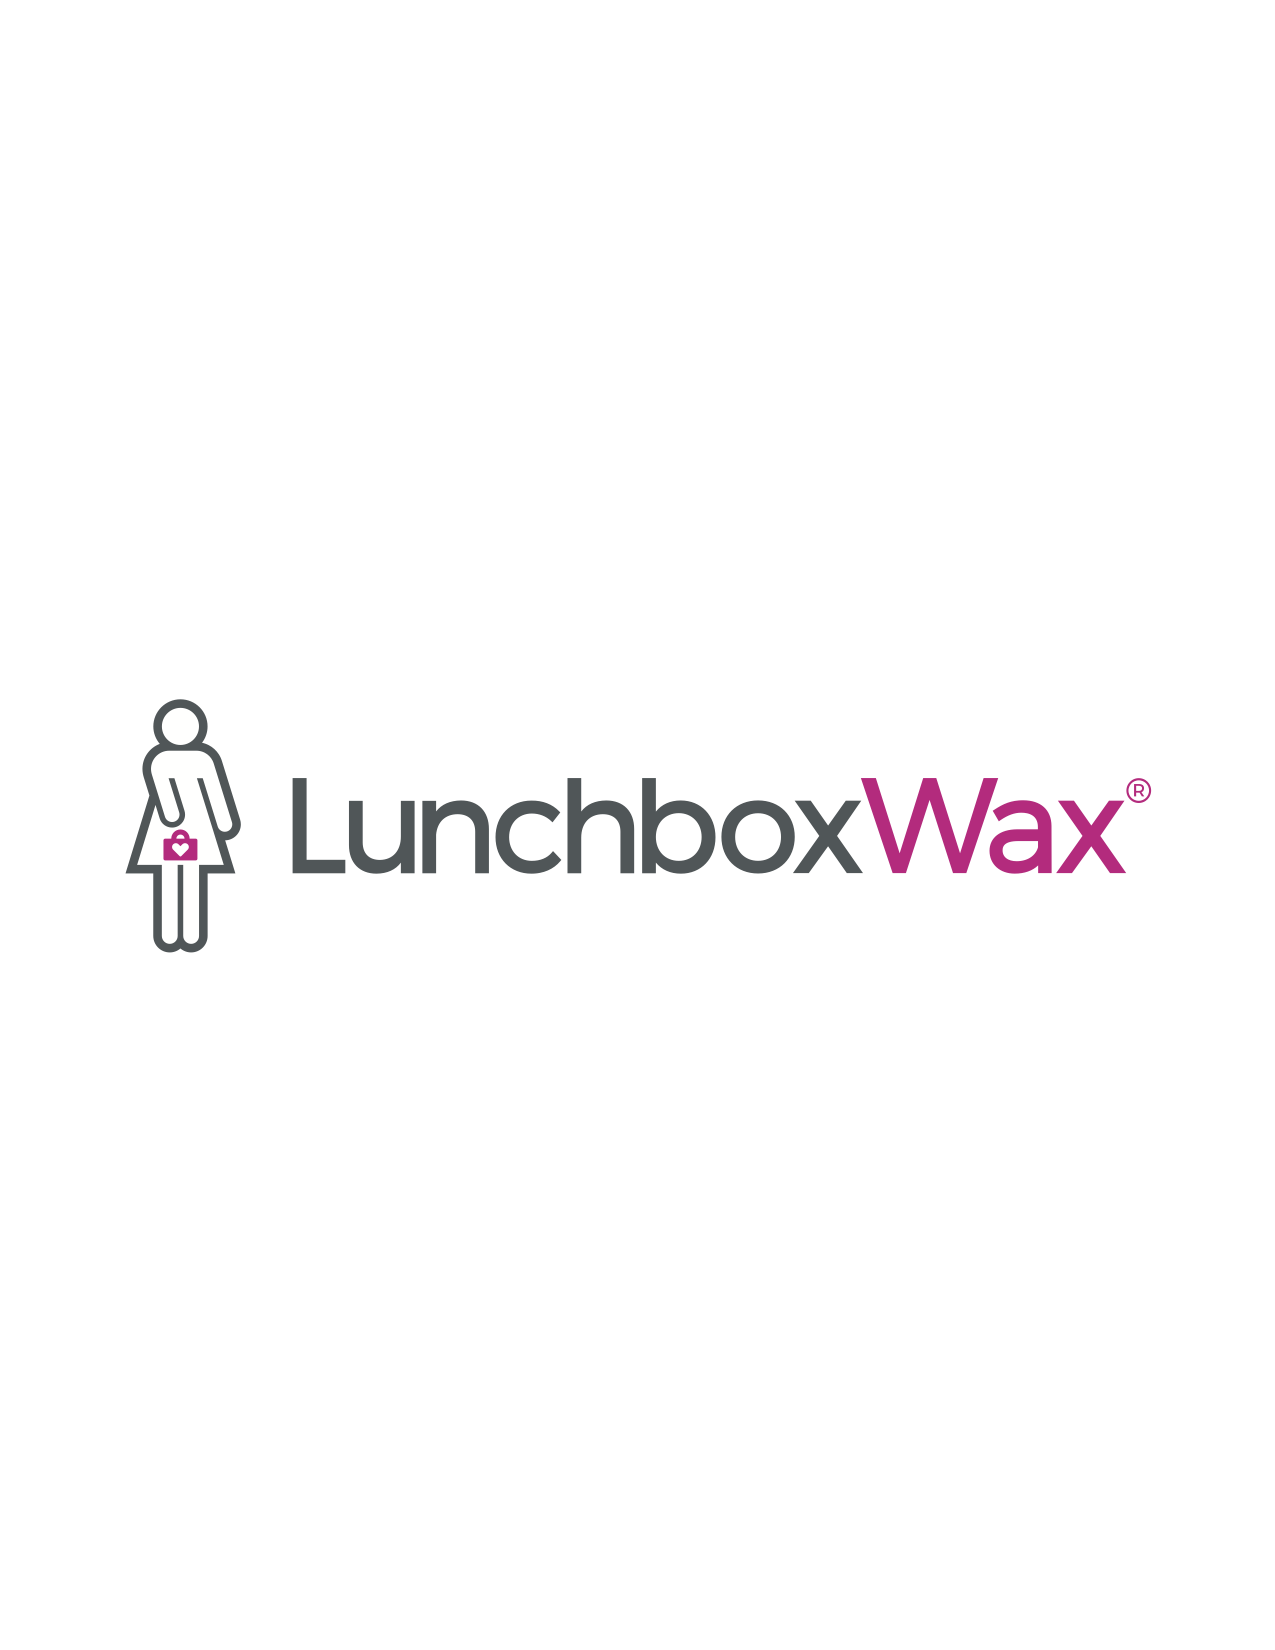 lunch box wax product submission